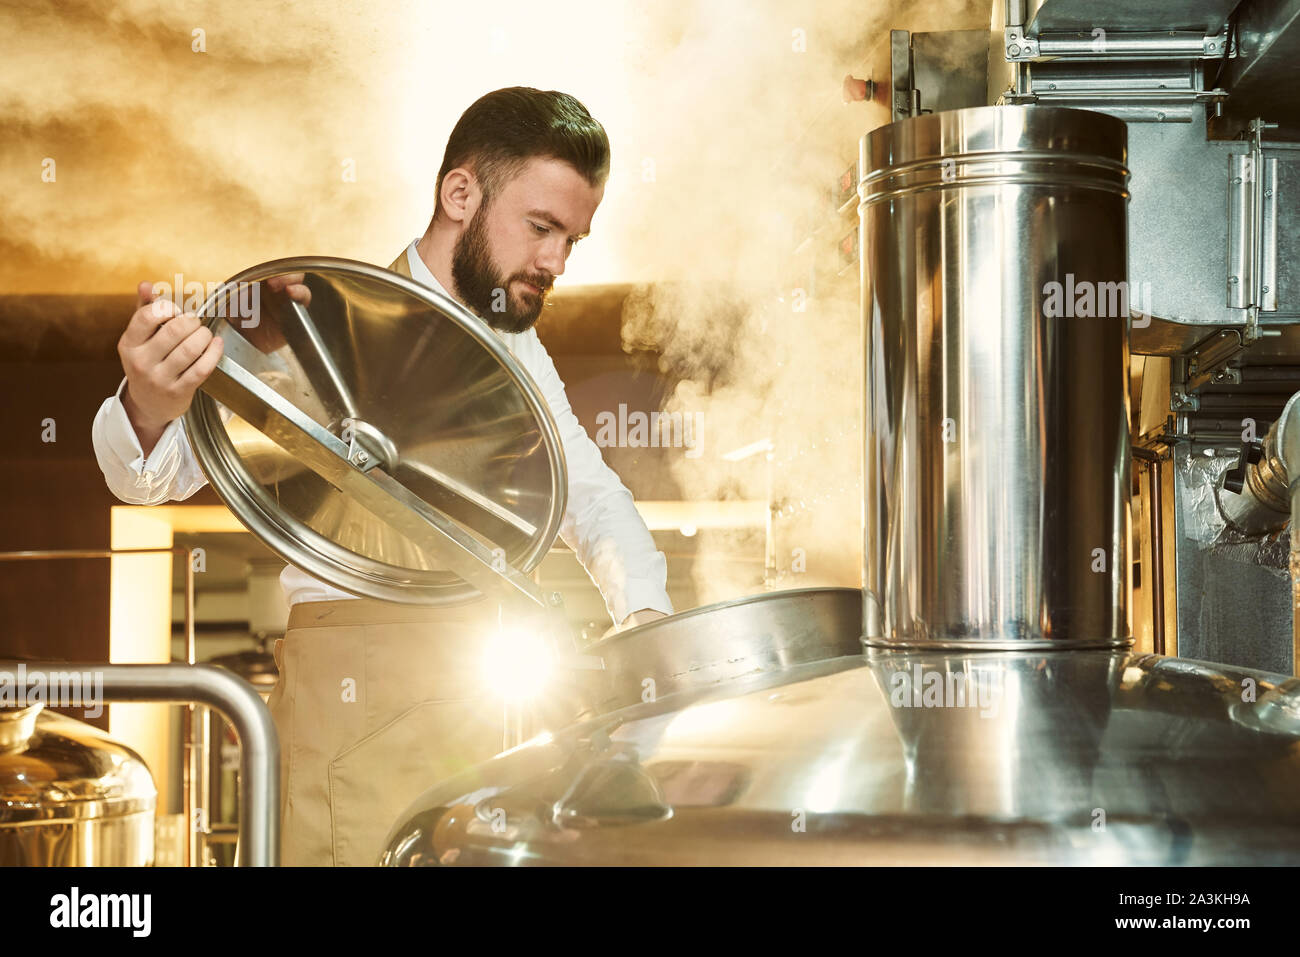 Brewery specialist opening cover of brew kettle, looking down. Engineer inspecting process of brewing beer with steam. Concept of modern bavaria. Stock Photo